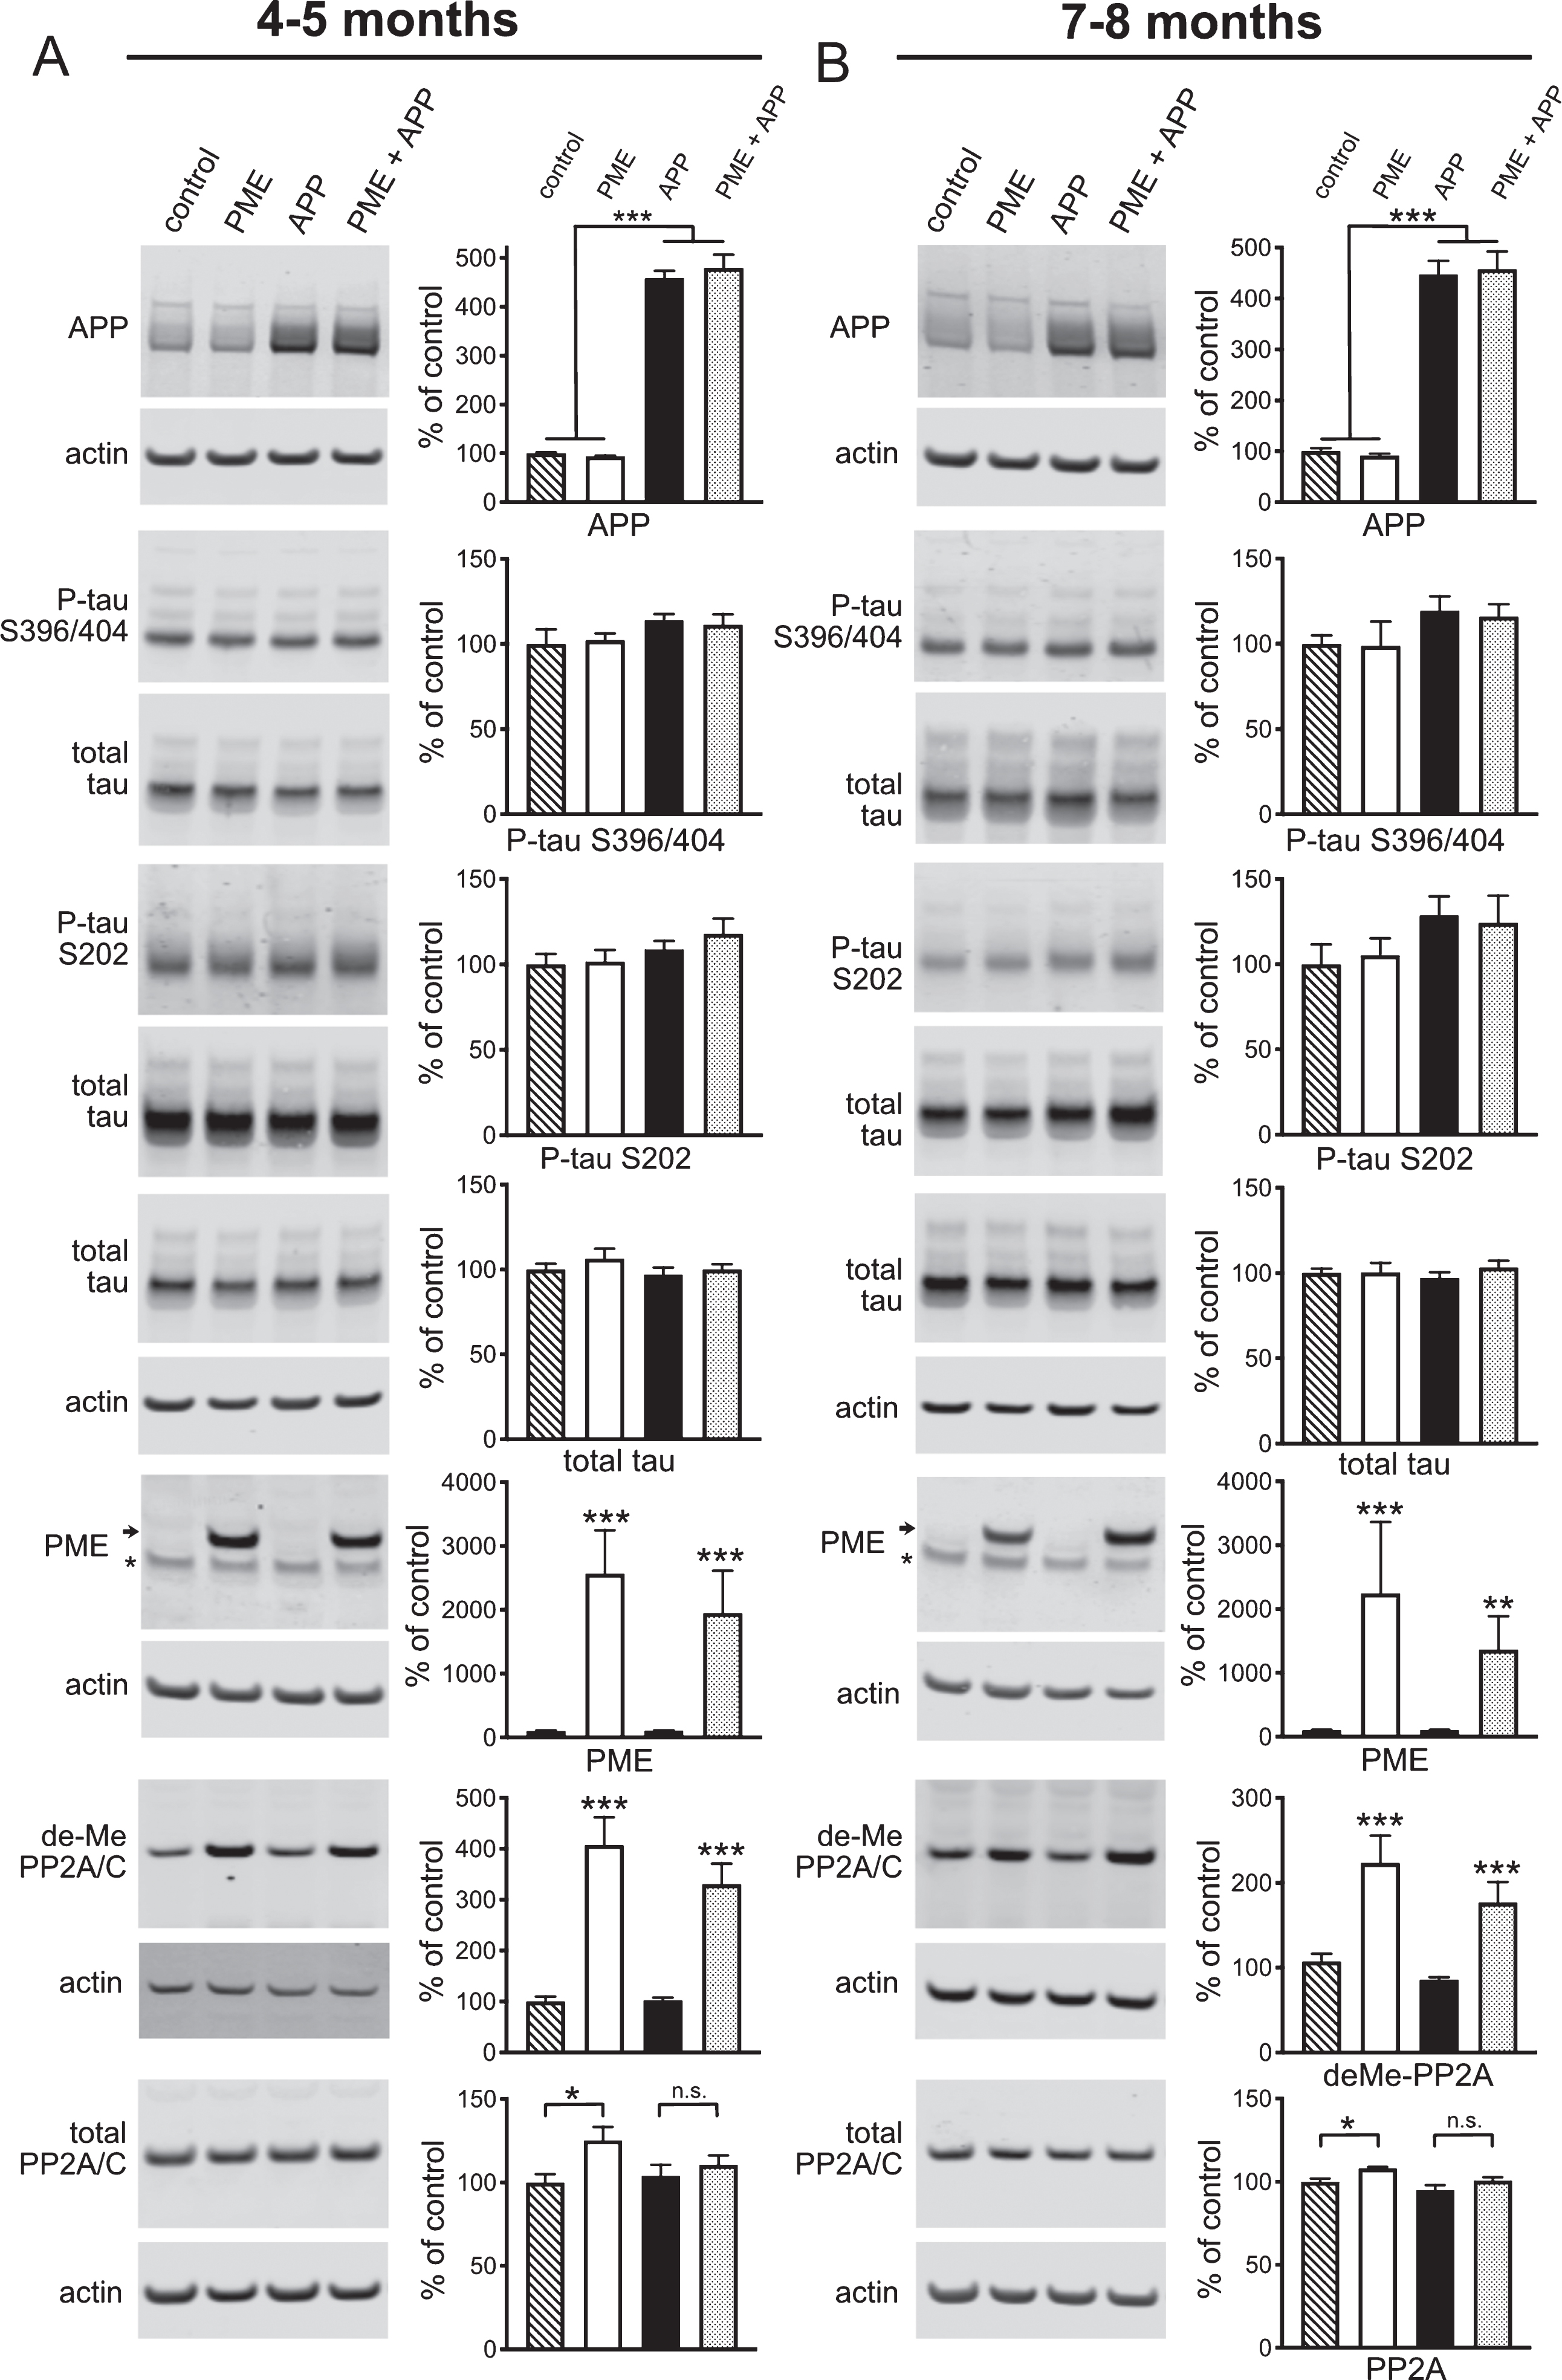 The effect of PME overexpression on APP expression, tau phosphorylation and PME protein levels in Tg2576 mice. A, B) Representative western blots showing anti-APP, phospho-tau serine 396/404 and serine 202, total tau, PME, demethylated PP2A/C and total PP2A/C immunoreactivity in hippocampal homogenates prepared from 4-5 (A) or 7-8-month-old (B) control, PME overexpressing, Tg2576 APP transgenic, or PME overexpressing/APP transgenic mice together with corresponding histograms showing average normalized immunoreactivity (±SEM) in each group. APP genotype significantly affected APP expression (2-way ANOVA with APP and PME genotype as factors: F(1,20) = 564.7, p < 0.0001 for 4-5-month-old mice and F(1,20) = 251.3, p < 0.0001 for 7-8-month-old mice). Sidak’s multiple comparisons showed no significant differences in APP expression between control and PME groups (p = 0.9504 for 4-5 and p = 0.9542 for 7-8-month-old mice) or between APP and PME + APP groups (p = 0.5961 for 4-5-month-old and, p = 0.9313 for 7-8-month-old mice). Animals carrying an APP transgene showed a trend for increased tau phosphorylation at serine residues 396/404 (APP:113.3±3.82, PME + APP: 111.3±6.05 versus control: 100±8.58, PME: 102.1±4.08 at 4-5 months, and APP:119.5±8.42, PME + APP: 115.9±7.41 versus control: 100±4.98, PME: 99.0±14.06 at 7-8 months) that did not reach statistical significance (2-way ANOVA with APP and PME genotype as factors: F(1,20) = 3.725, p = 0.0679 for 4-5-month-old mice and F(1,20) = 3.806, p = 0.0652 for 7-8-month-old mice), and was not affected by PME overexpression (Sidak’s multiple comparisons between APP and PME + APP groups: p = 0.9499 for 4-5-month-old and, p = 0.9554 for 7-8-month-old mice). Similarly, animals carrying an APP transgene showed a trend for increased tau phosphorylation at serine residue 202 (APP:108.9±4.78, PME + APP: 117.9±8.82 versus control: 100±6.13, PME: 101.6±6.87 at 4-5 months, and APP: 128.7±11.25, PME + APP: 124.3±16.02 versus control: 100±11.51, PME: 105.2±10.04), that did not reach statistical significance (2-way ANOVA with APP and PME genotype as factors: F(1,20) = 3.423, p = 0.0791 for 4-5-month-old mice and F(1,20) = 3.721, p = 0.0680 for 7-8-month-old mice), and was not affected by PME overexpression (Sidak’s multiple comparisons between APP and PME + APP groups (p = 0.5895 for 4-5-month-old and, p = 0.9750 for 7-8-month-old mice). Neither PME nor APP transgenes significantly affected endogenous tau levels (2-way ANOVA for effect of PME transgene with APP and PME genotype as factors: F(1,44) = 1.098, p = 0.3005 for 4-5-month-old mice and F(1,44) = 0.6706, p = 0.4173 for 7-8-month-old mice; 2-way ANOVA for effect of APP transgene with APP and PME genotype as factors: F(1,44) = 0.6987, p = 0.4077 for 4-5-month-old mice and F(1,44)<0.0001, p = 0.9985 for 7-8-month-old mice). Total PME expression (endogenous + transgenic) showed a significant effect of PME genotype (2-way ANOVA with PME and APP genotype as factors: F(1,20) = 20.39, p = 0.0002 for 4-5-month-old mice and F(1,20) = 7.611, p = 0.0121 for 7-8-month-old mice). Sidak’s multiple comparisons showed no significant differences in PME expression between control and APP groups (p > 0.9999 for 4-5 and 7-8-month-old mice) or between PME and PME + APP groups (p = 0.6028 for 4-5-month-old and, p = 0.5471 for 7-8-month-old mice). Transgenic PME overexpression significantly increased the amount of PP2A catalytic subunit that was demethylated at Leucine 309 (2-way ANOVA with PME and APP genotype as factors: F(1,20) = 59.54, p < 0.0001 for 4-5-month-old mice and F(1,20) = 24.55, p < 0.0001 for 7-8-month-old mice). Sidak’s multiple comparisons showed significant differences in demethyl-PP2A/C immunoreactivity between control and PME groups (p < 0.0001 for 4-5 and p = 0.0017 for 7-8-month-old mice) or between APP and PME + APP groups (p = 0.0003 for 4-5-month-old and, p = 0.0119 for 7-8-month-old mice). Transgenic PME overexpression also led to a small but significant increase in the total amount of PP2A catalytic subunit in the PME relative to control group but not the PME + APP relative to APP alone group (2-way ANOVA for effect of PME with PME and APP genotype as factors: F(1,20) = 6.077, p = 0.0229 for 4-5-month-old mice and F(1,20) = 10.73, p = 0.0048 for 7-8-month-old mice). Sidak’s multiple comparisons showed significant differences in total PP2A/C immunoreactivity between control and PME groups (p = 0.0230 for 4-5 and p = 0.0313 for 7-8-month-old mice) but not APP and PME + APP groups (p = 0.7376 for 4-5-month-old and p = 0.1374 for 7-8-month-old mice). For all blots band intensities in each lane were normalized to corresponding actin or total tau immunoreactivity in that lane, and values were expressed as a percentage of the mean of the control group (N = 6 per group).